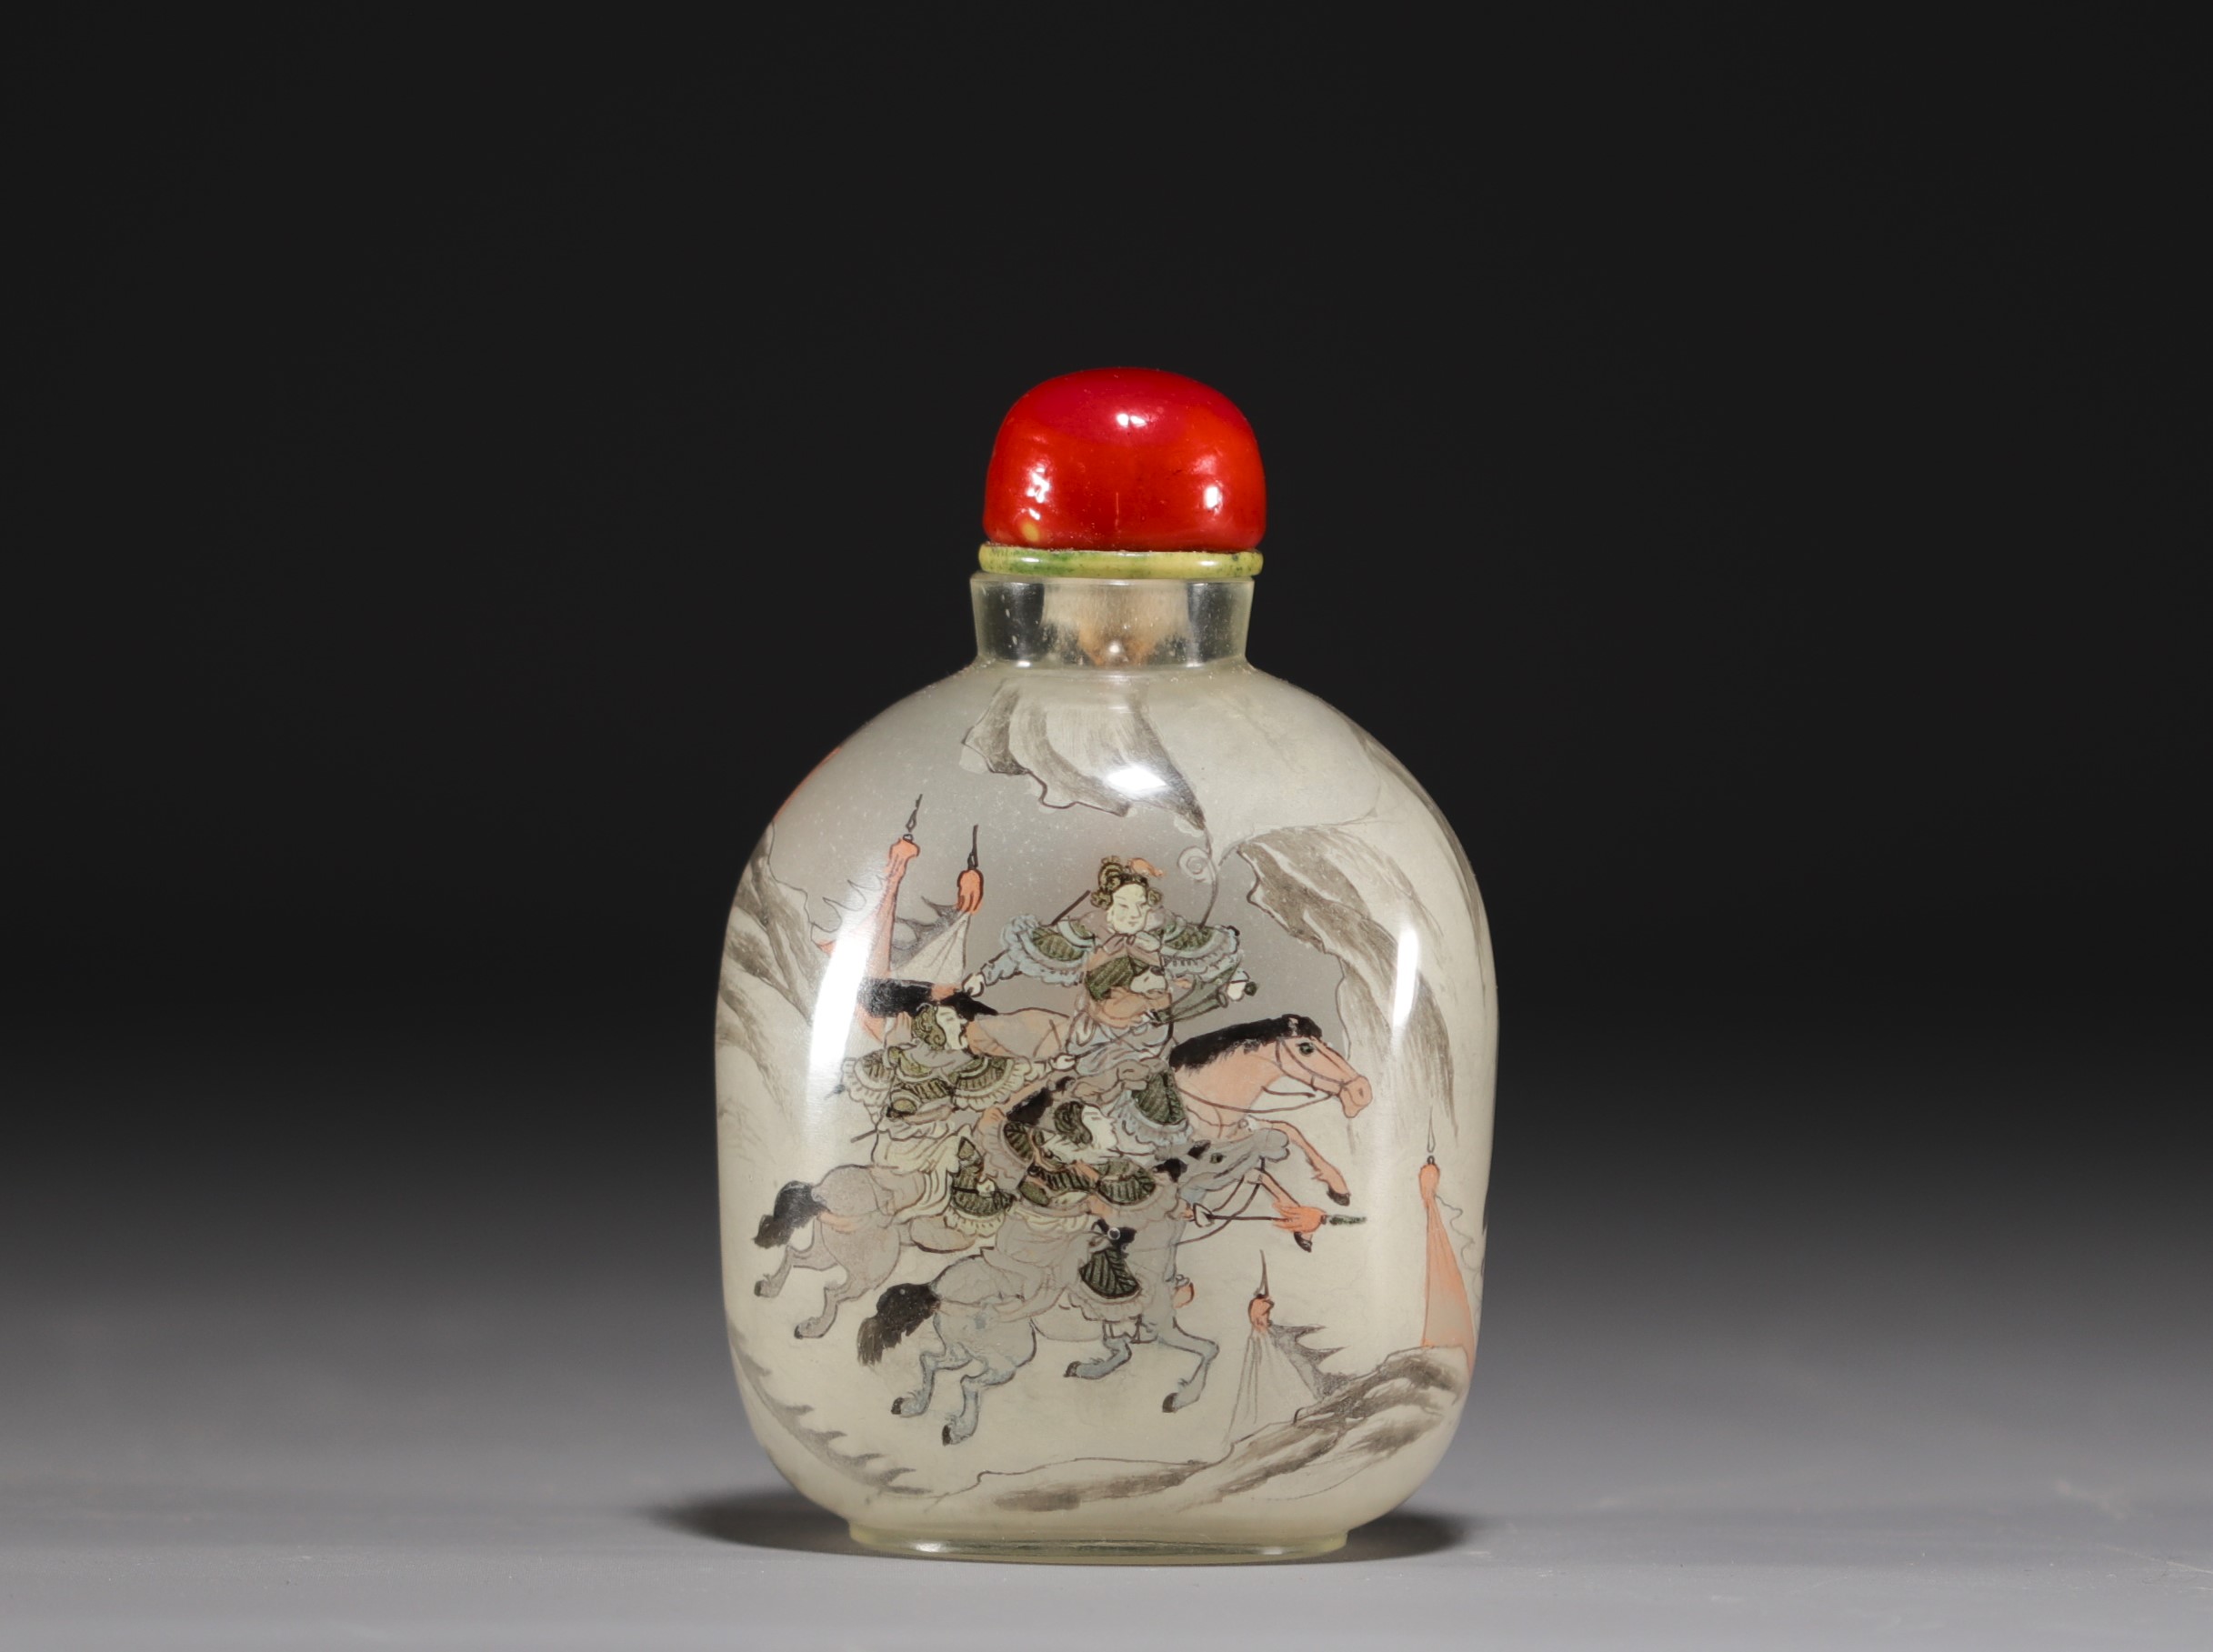 China - Glass snuffbox painted on the inside depicting a combat scene on horseback, early 20th centu - Image 2 of 3